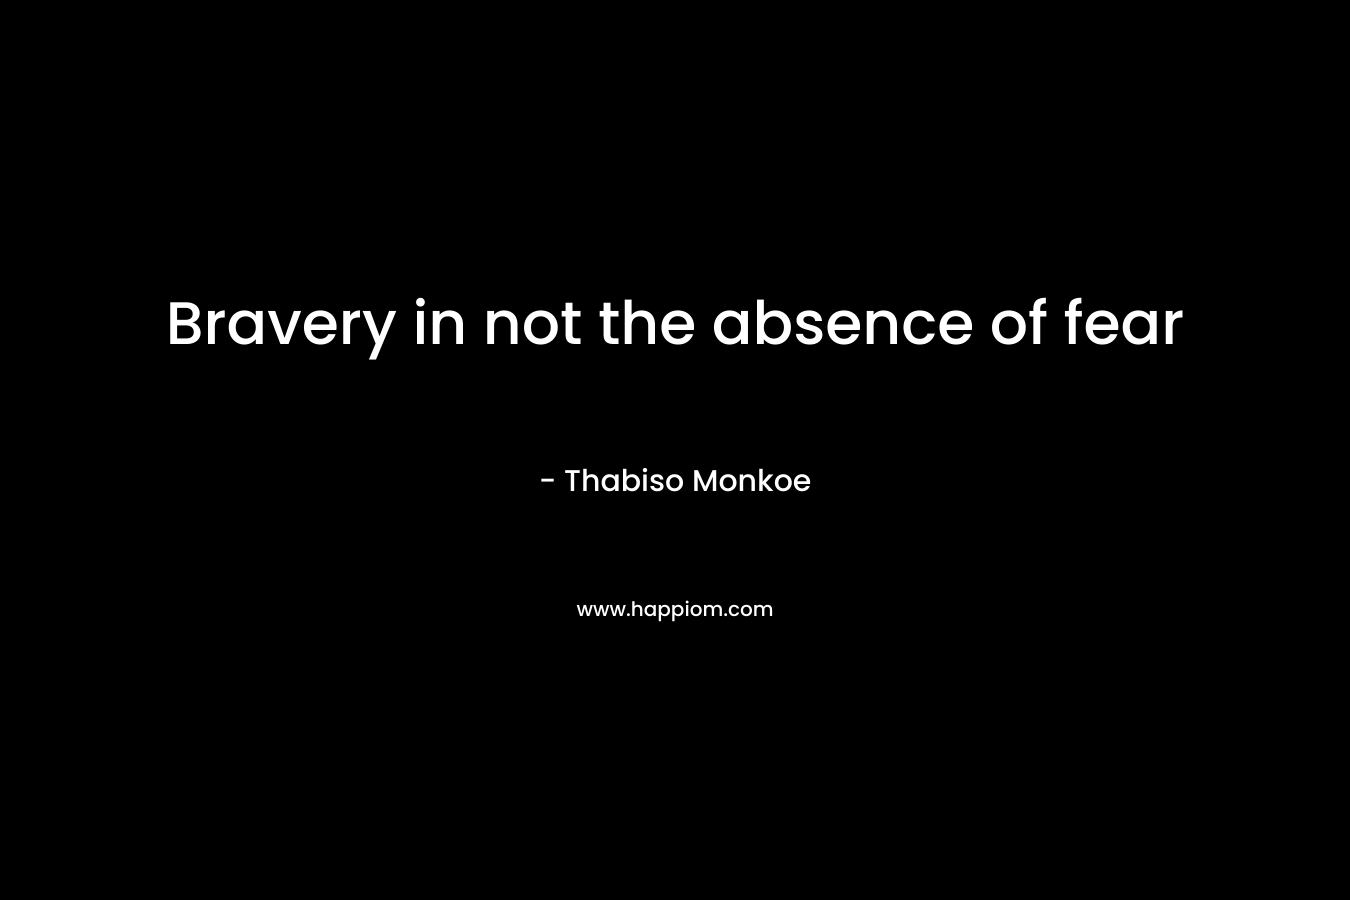 Bravery in not the absence of fear